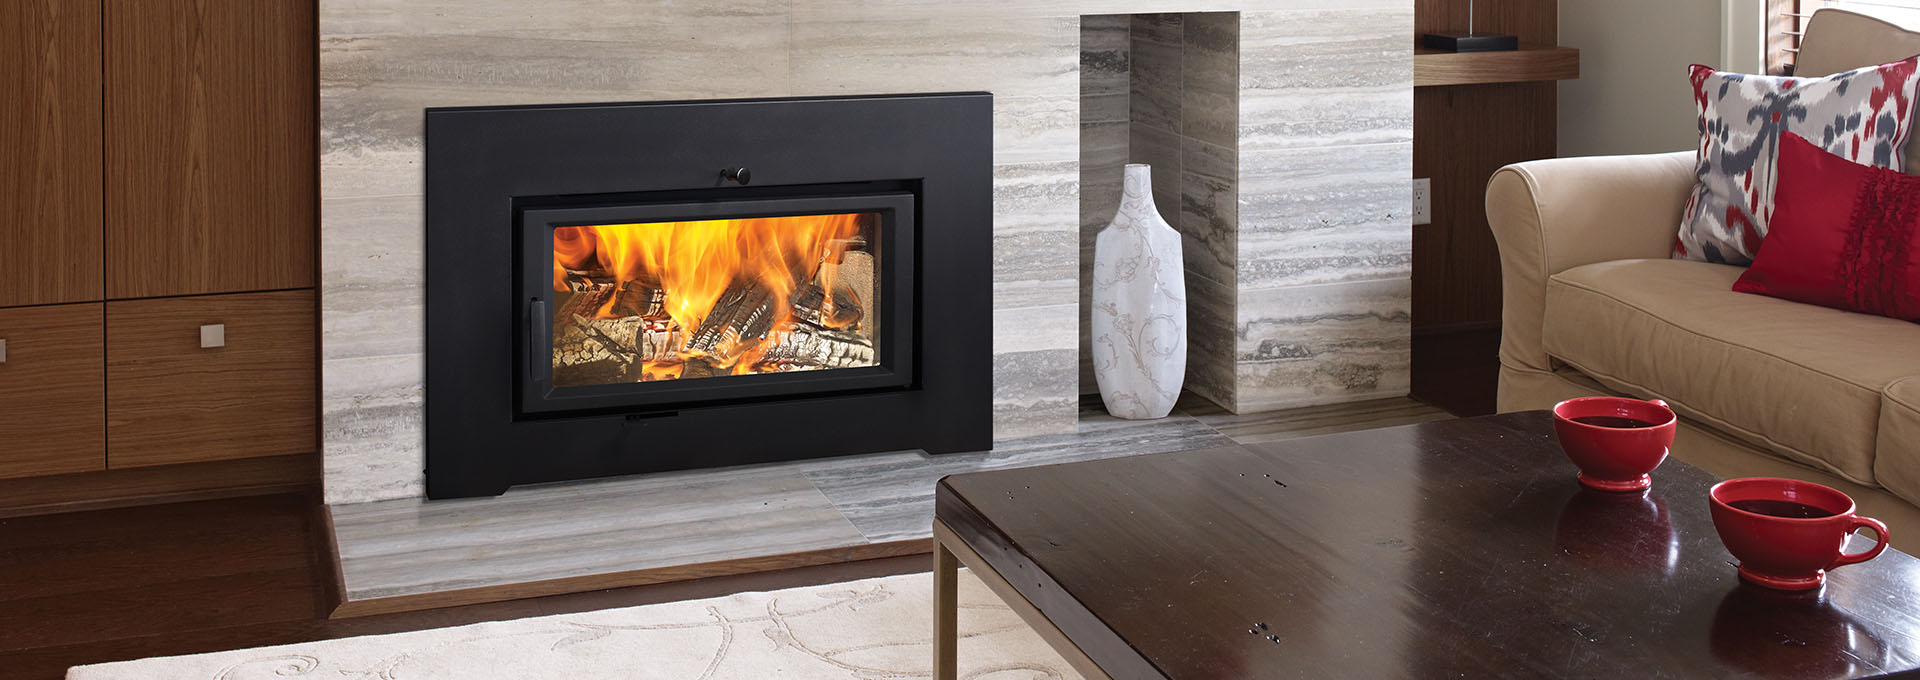 Electric Fireplaces for Sale In Clearance Best Of Wood Inserts Epa Certified